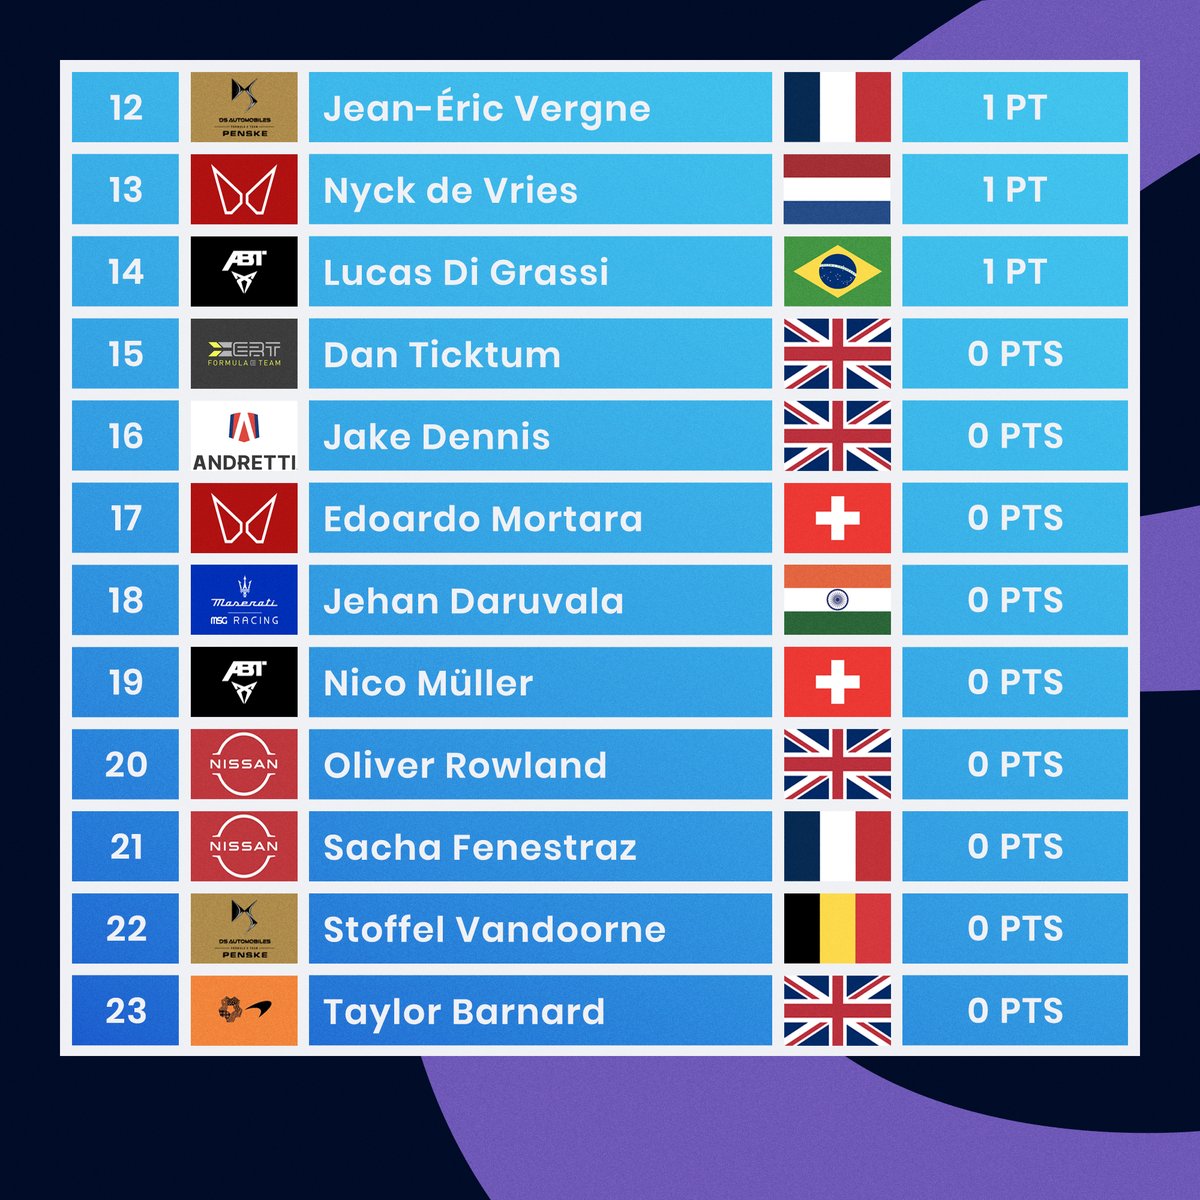 The updated Driver Penalty Points table ahead of the Berlin E-Prix.

Sam Bird has lost 2 points, which were picked up during the 2023 Monaco E-Prix.

António Félix da Costa has lost 1 point, which was picked up during the 2023 Monaco E-Prix.

#FormulaE #BerlinEPrix 🇩🇪